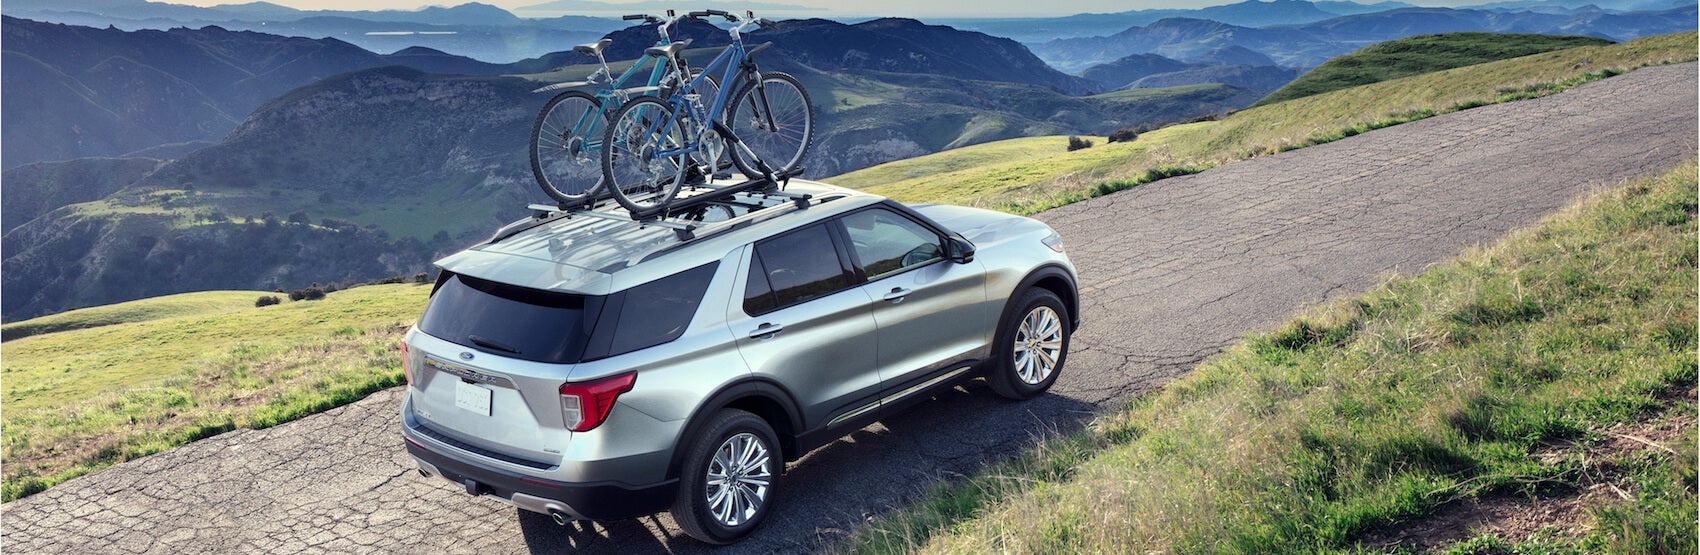 2021 Ford Explorer towing capacity